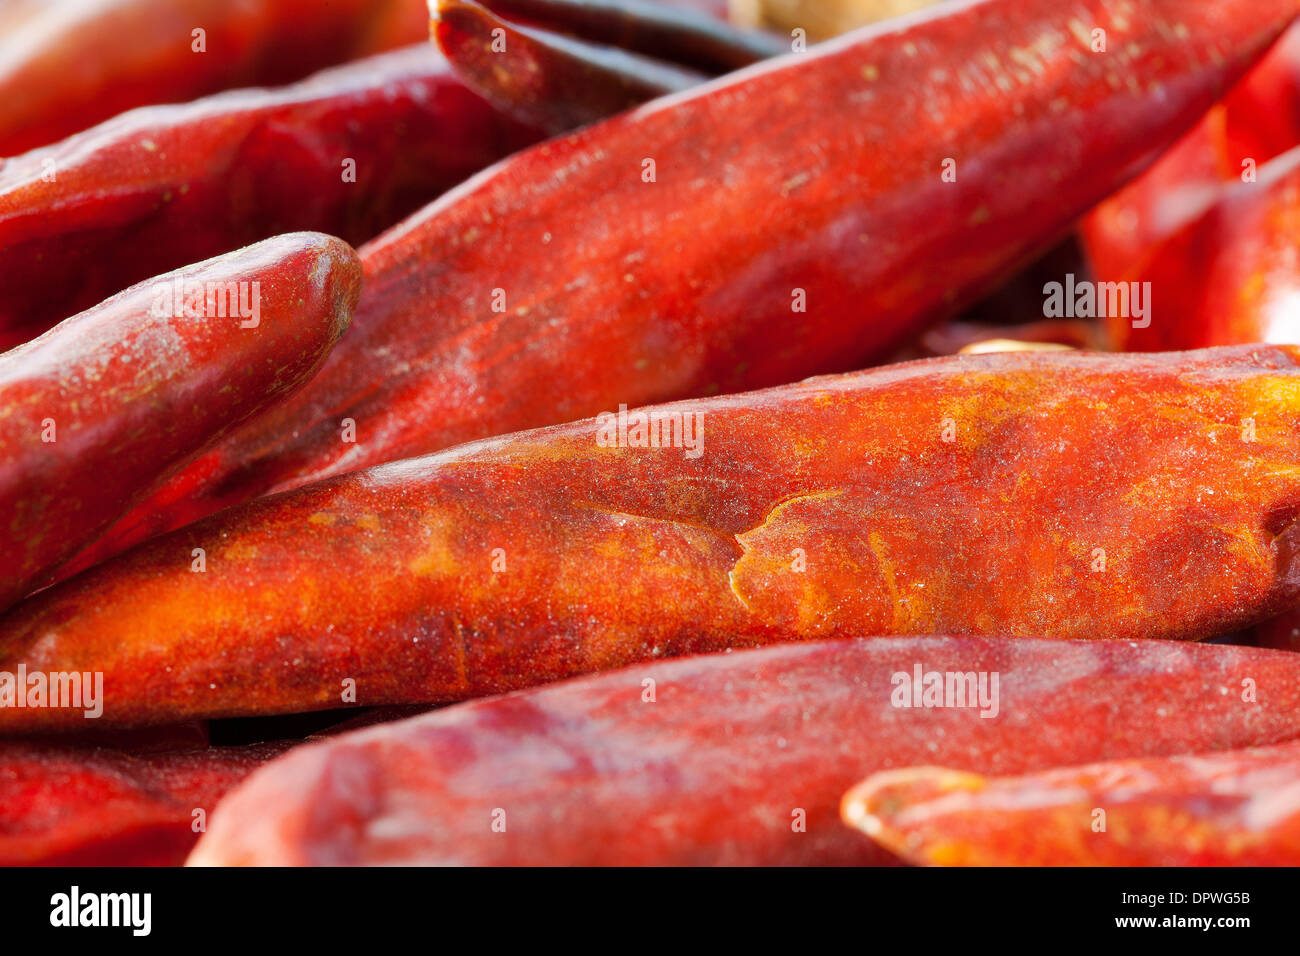 Red Chili Peppers Stock Photo